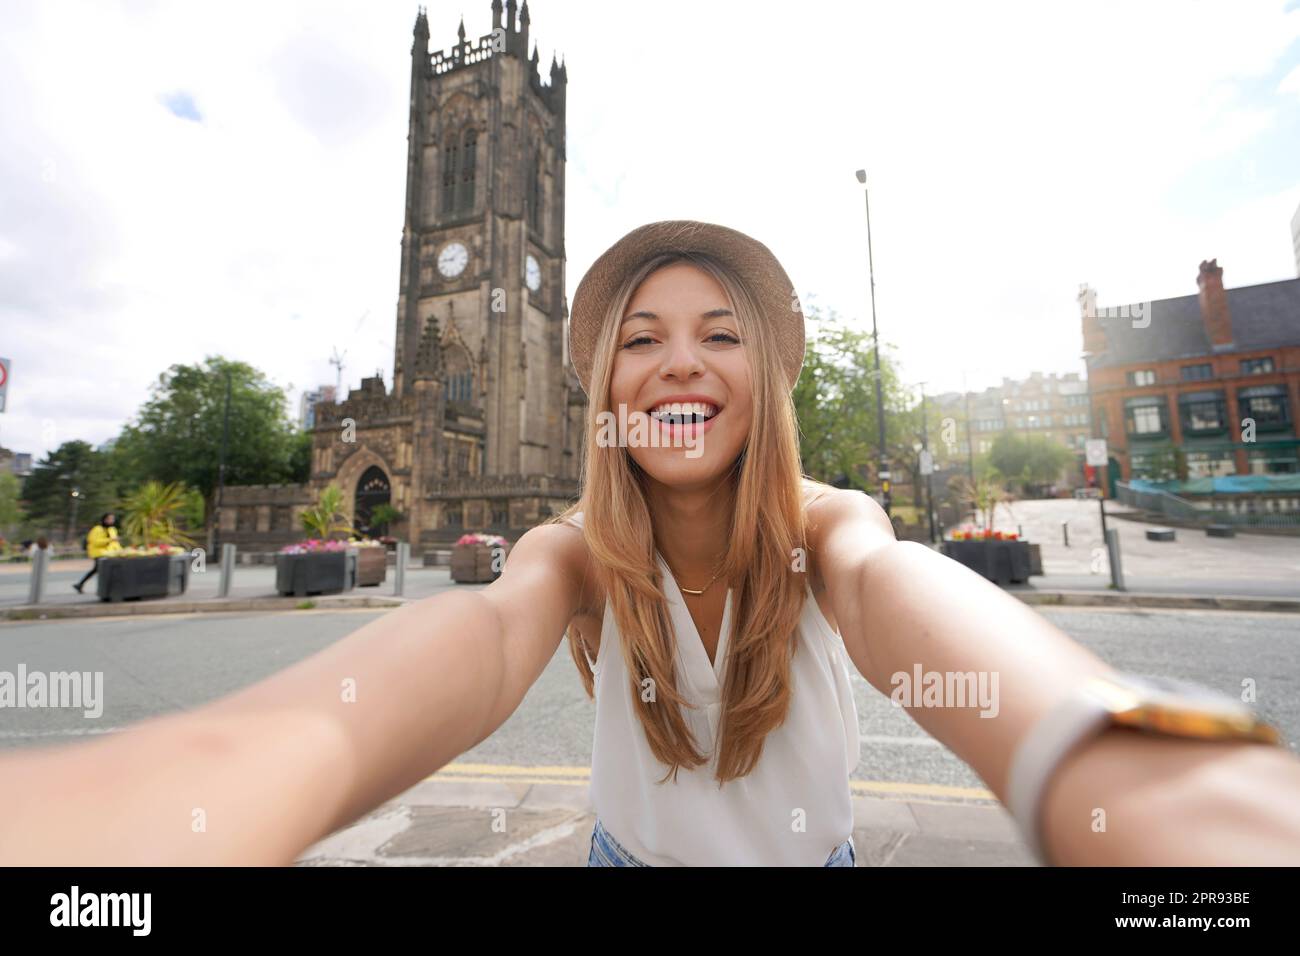 Beautiful girl taking self portrait with Manchester Cathedral on the background, England, United Kingdom Stock Photo